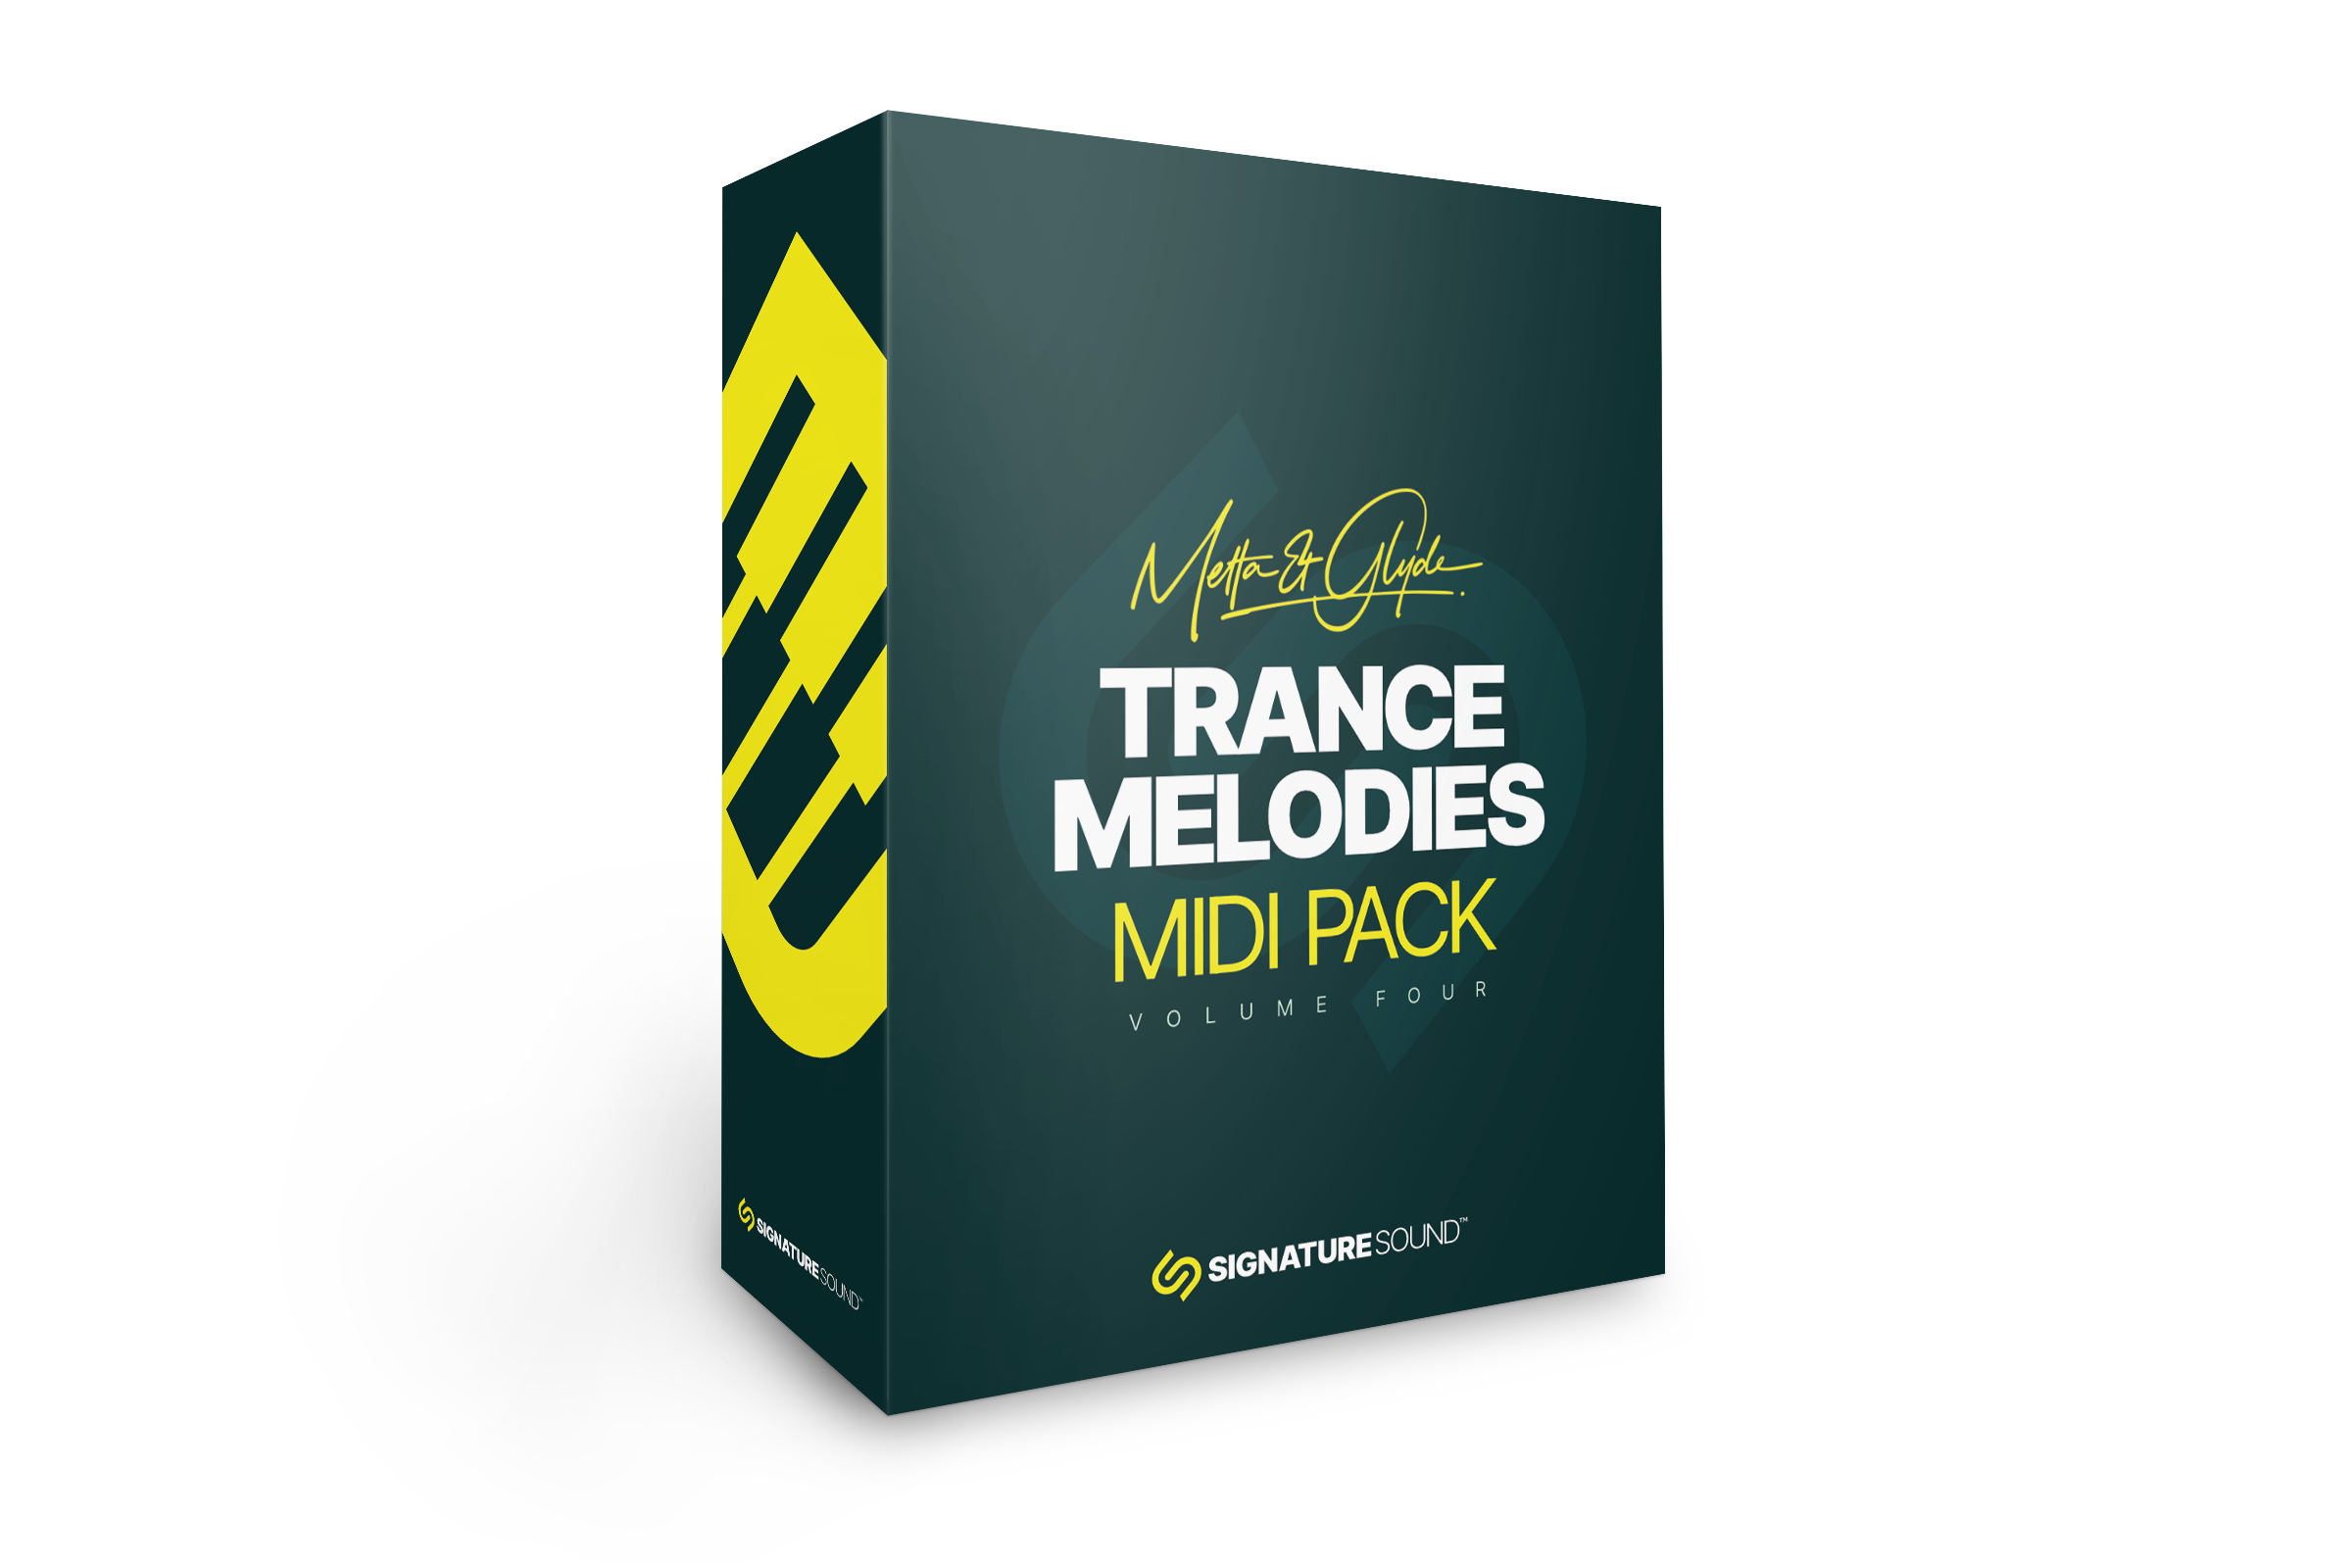 Metta & Glyde Trance Melodies [Midi Pack] Volume Four